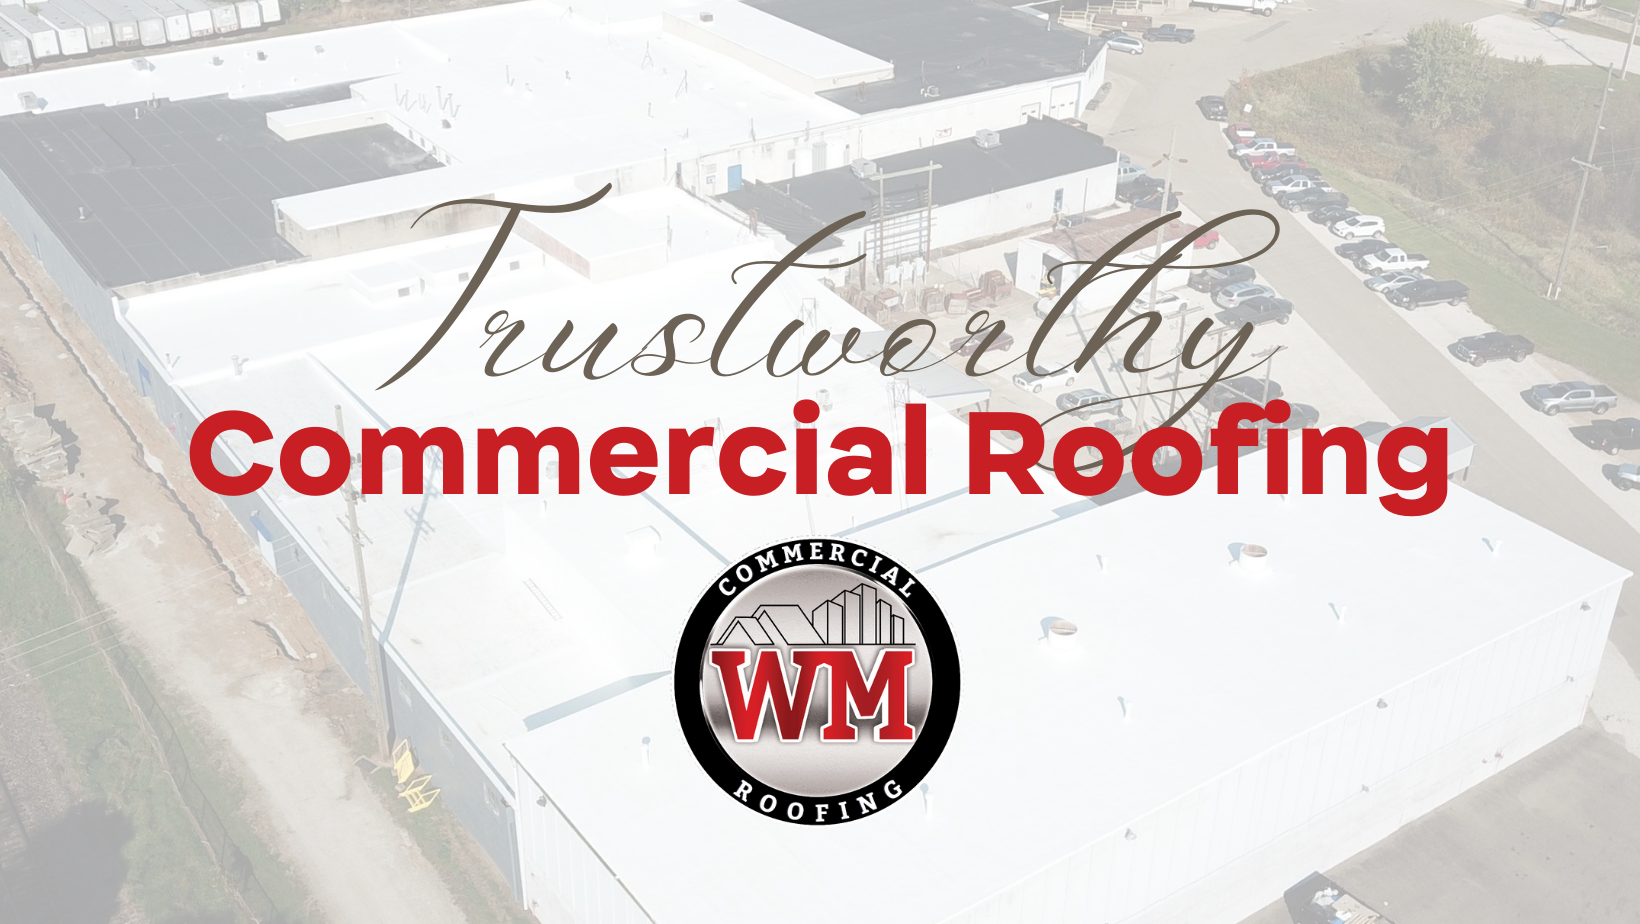 WM Commercial Roofing